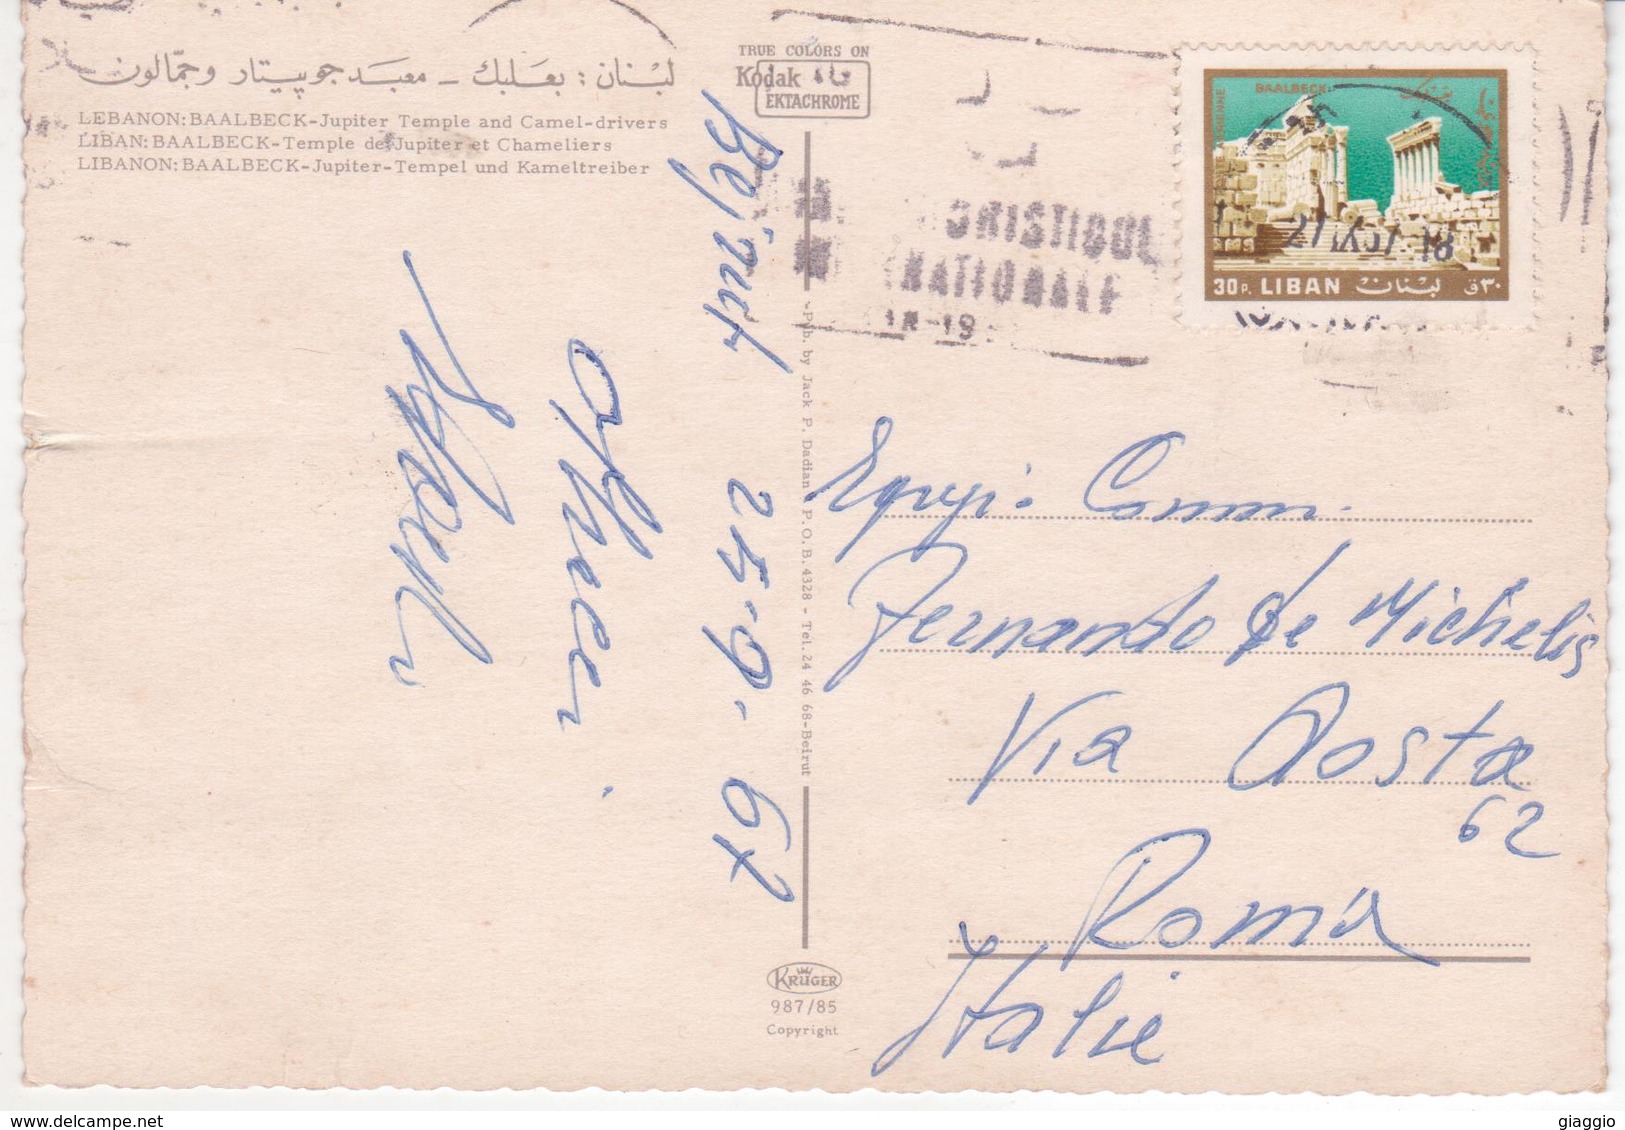 °°° 13513 - LIBAN - BAALBECK - JUPITER TEMPLE AND CAMEL DRIVERS - 1967 With Stamps °°° - Libano